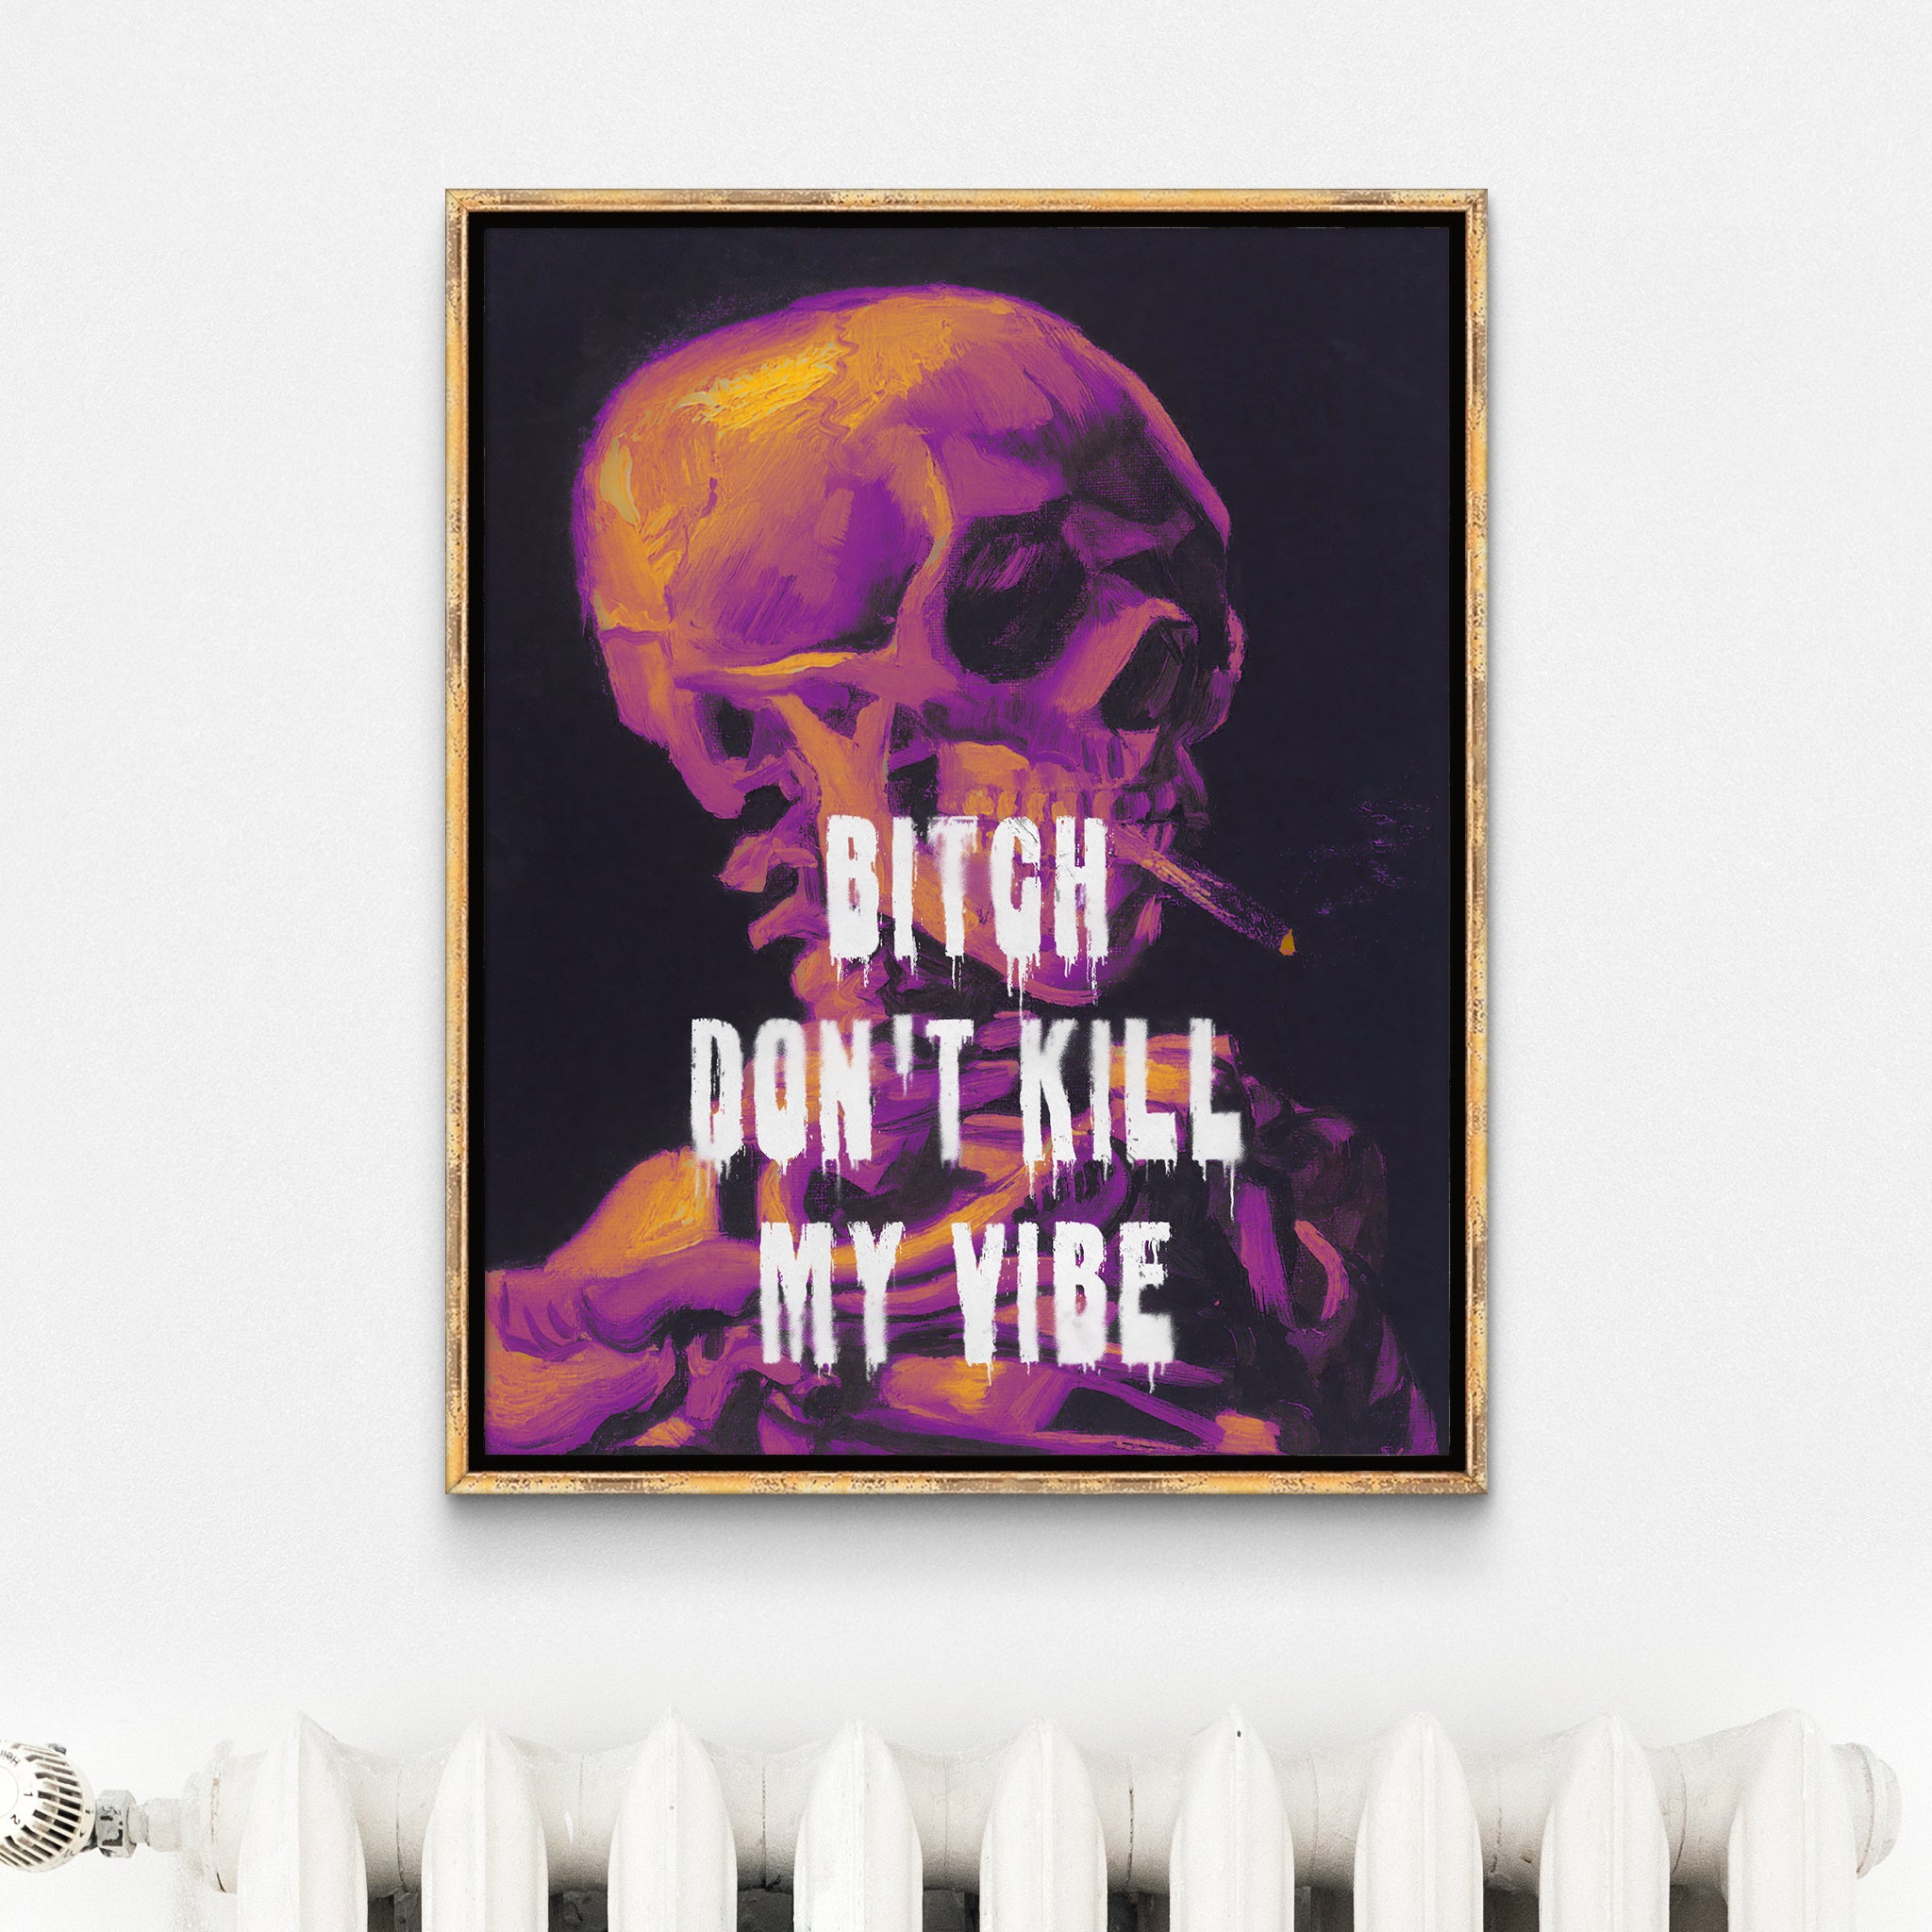 Be inspired by our altered Van Gogh's Bitch Don't Kill My Vibe art print. This artwork was printed using the giclée process on archival acid-free paper and is presented in an antique golden frame that captures its timeless beauty in every detail.